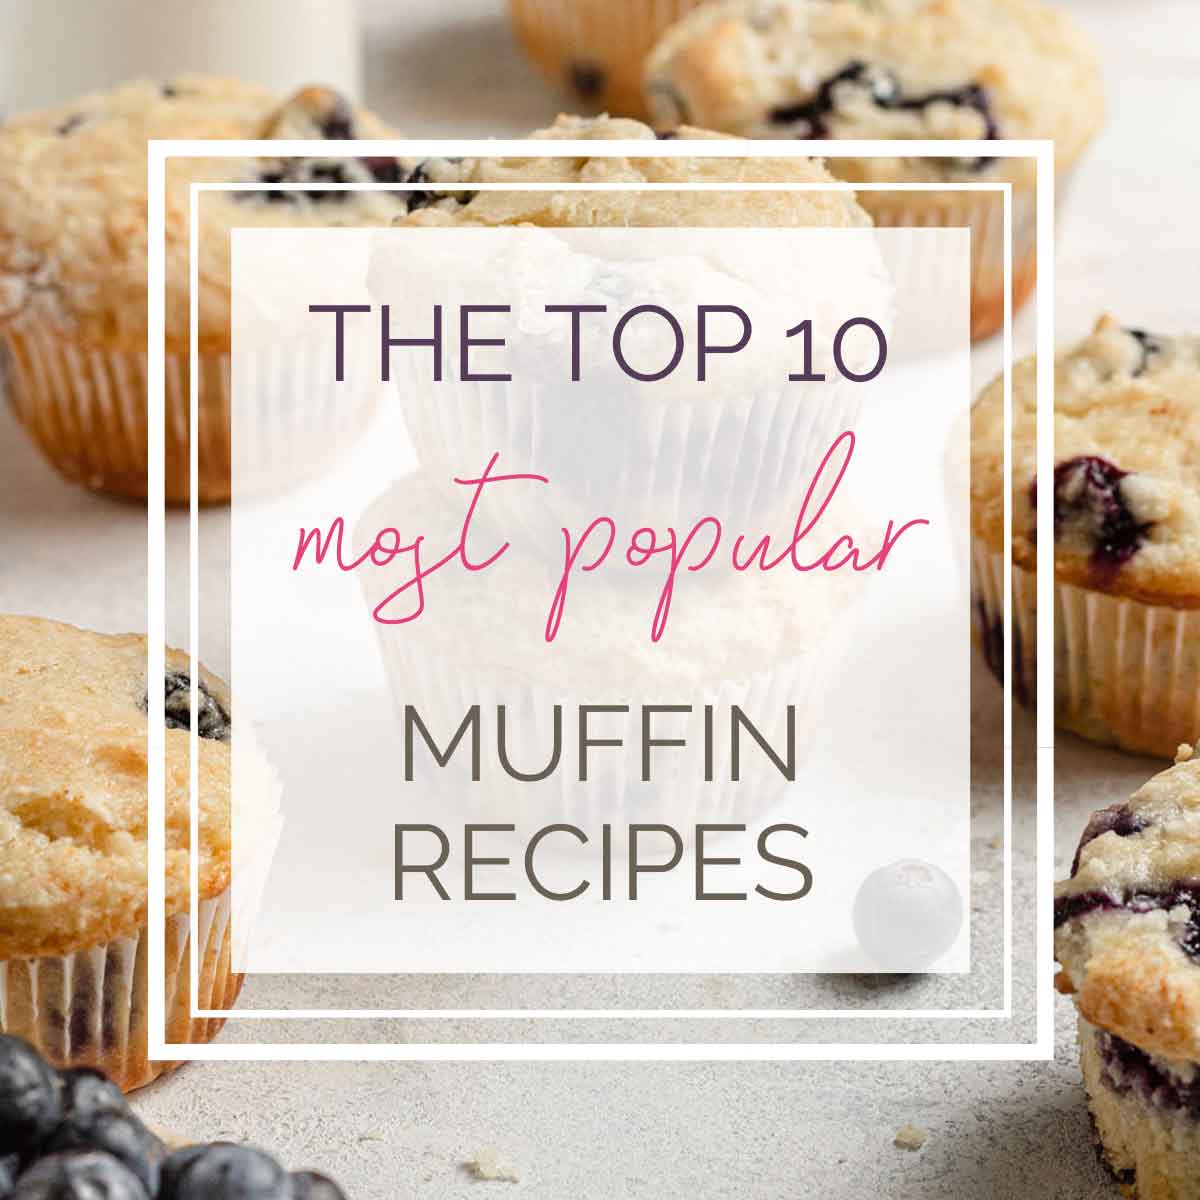 A photo of blueberry muffins with text overlay reading "The Top 10 Most Popular Muffin Recipes".